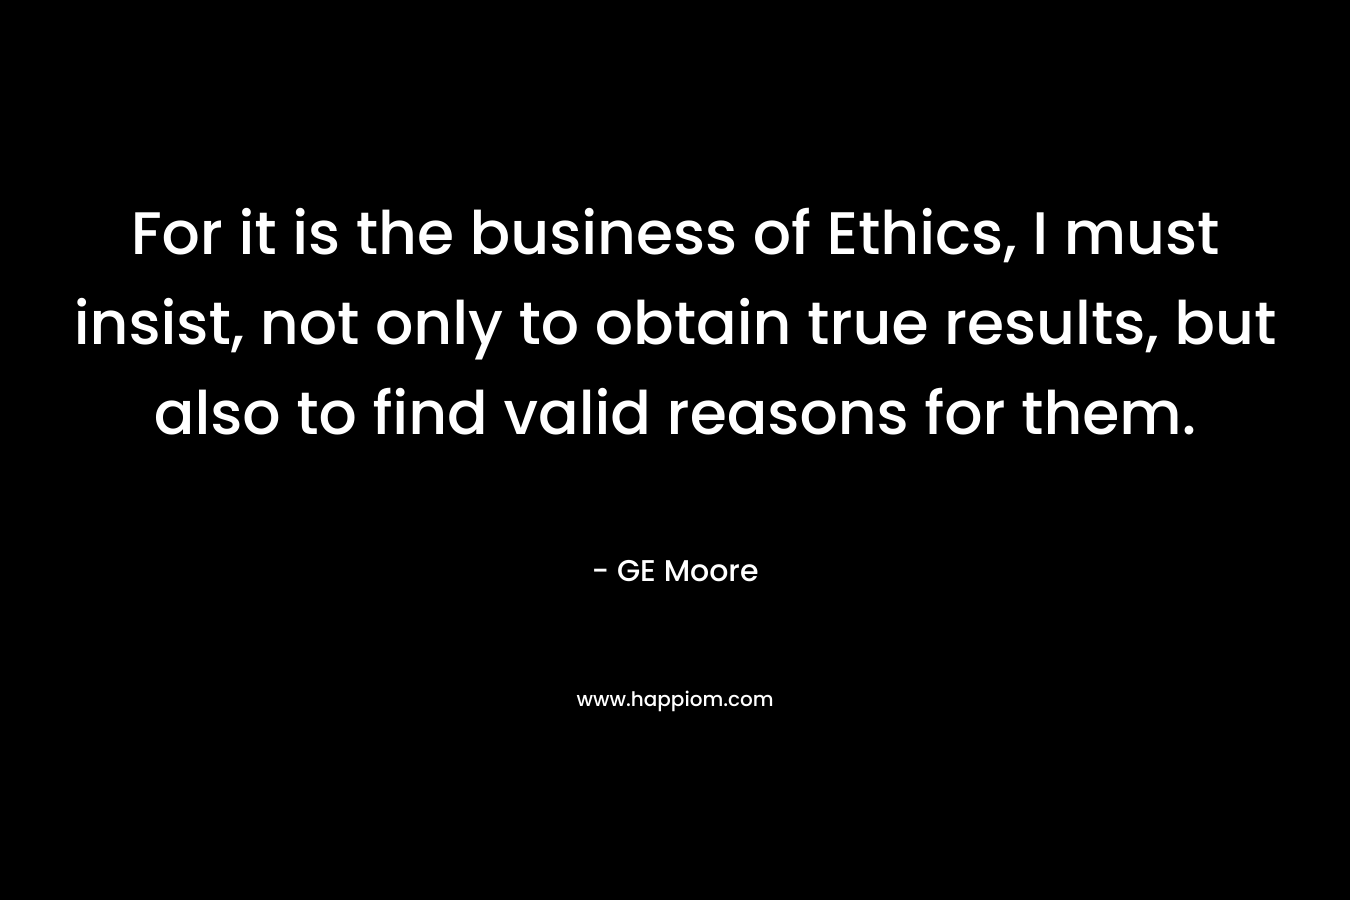 For it is the business of Ethics, I must insist, not only to obtain true results, but also to find valid reasons for them. – GE Moore